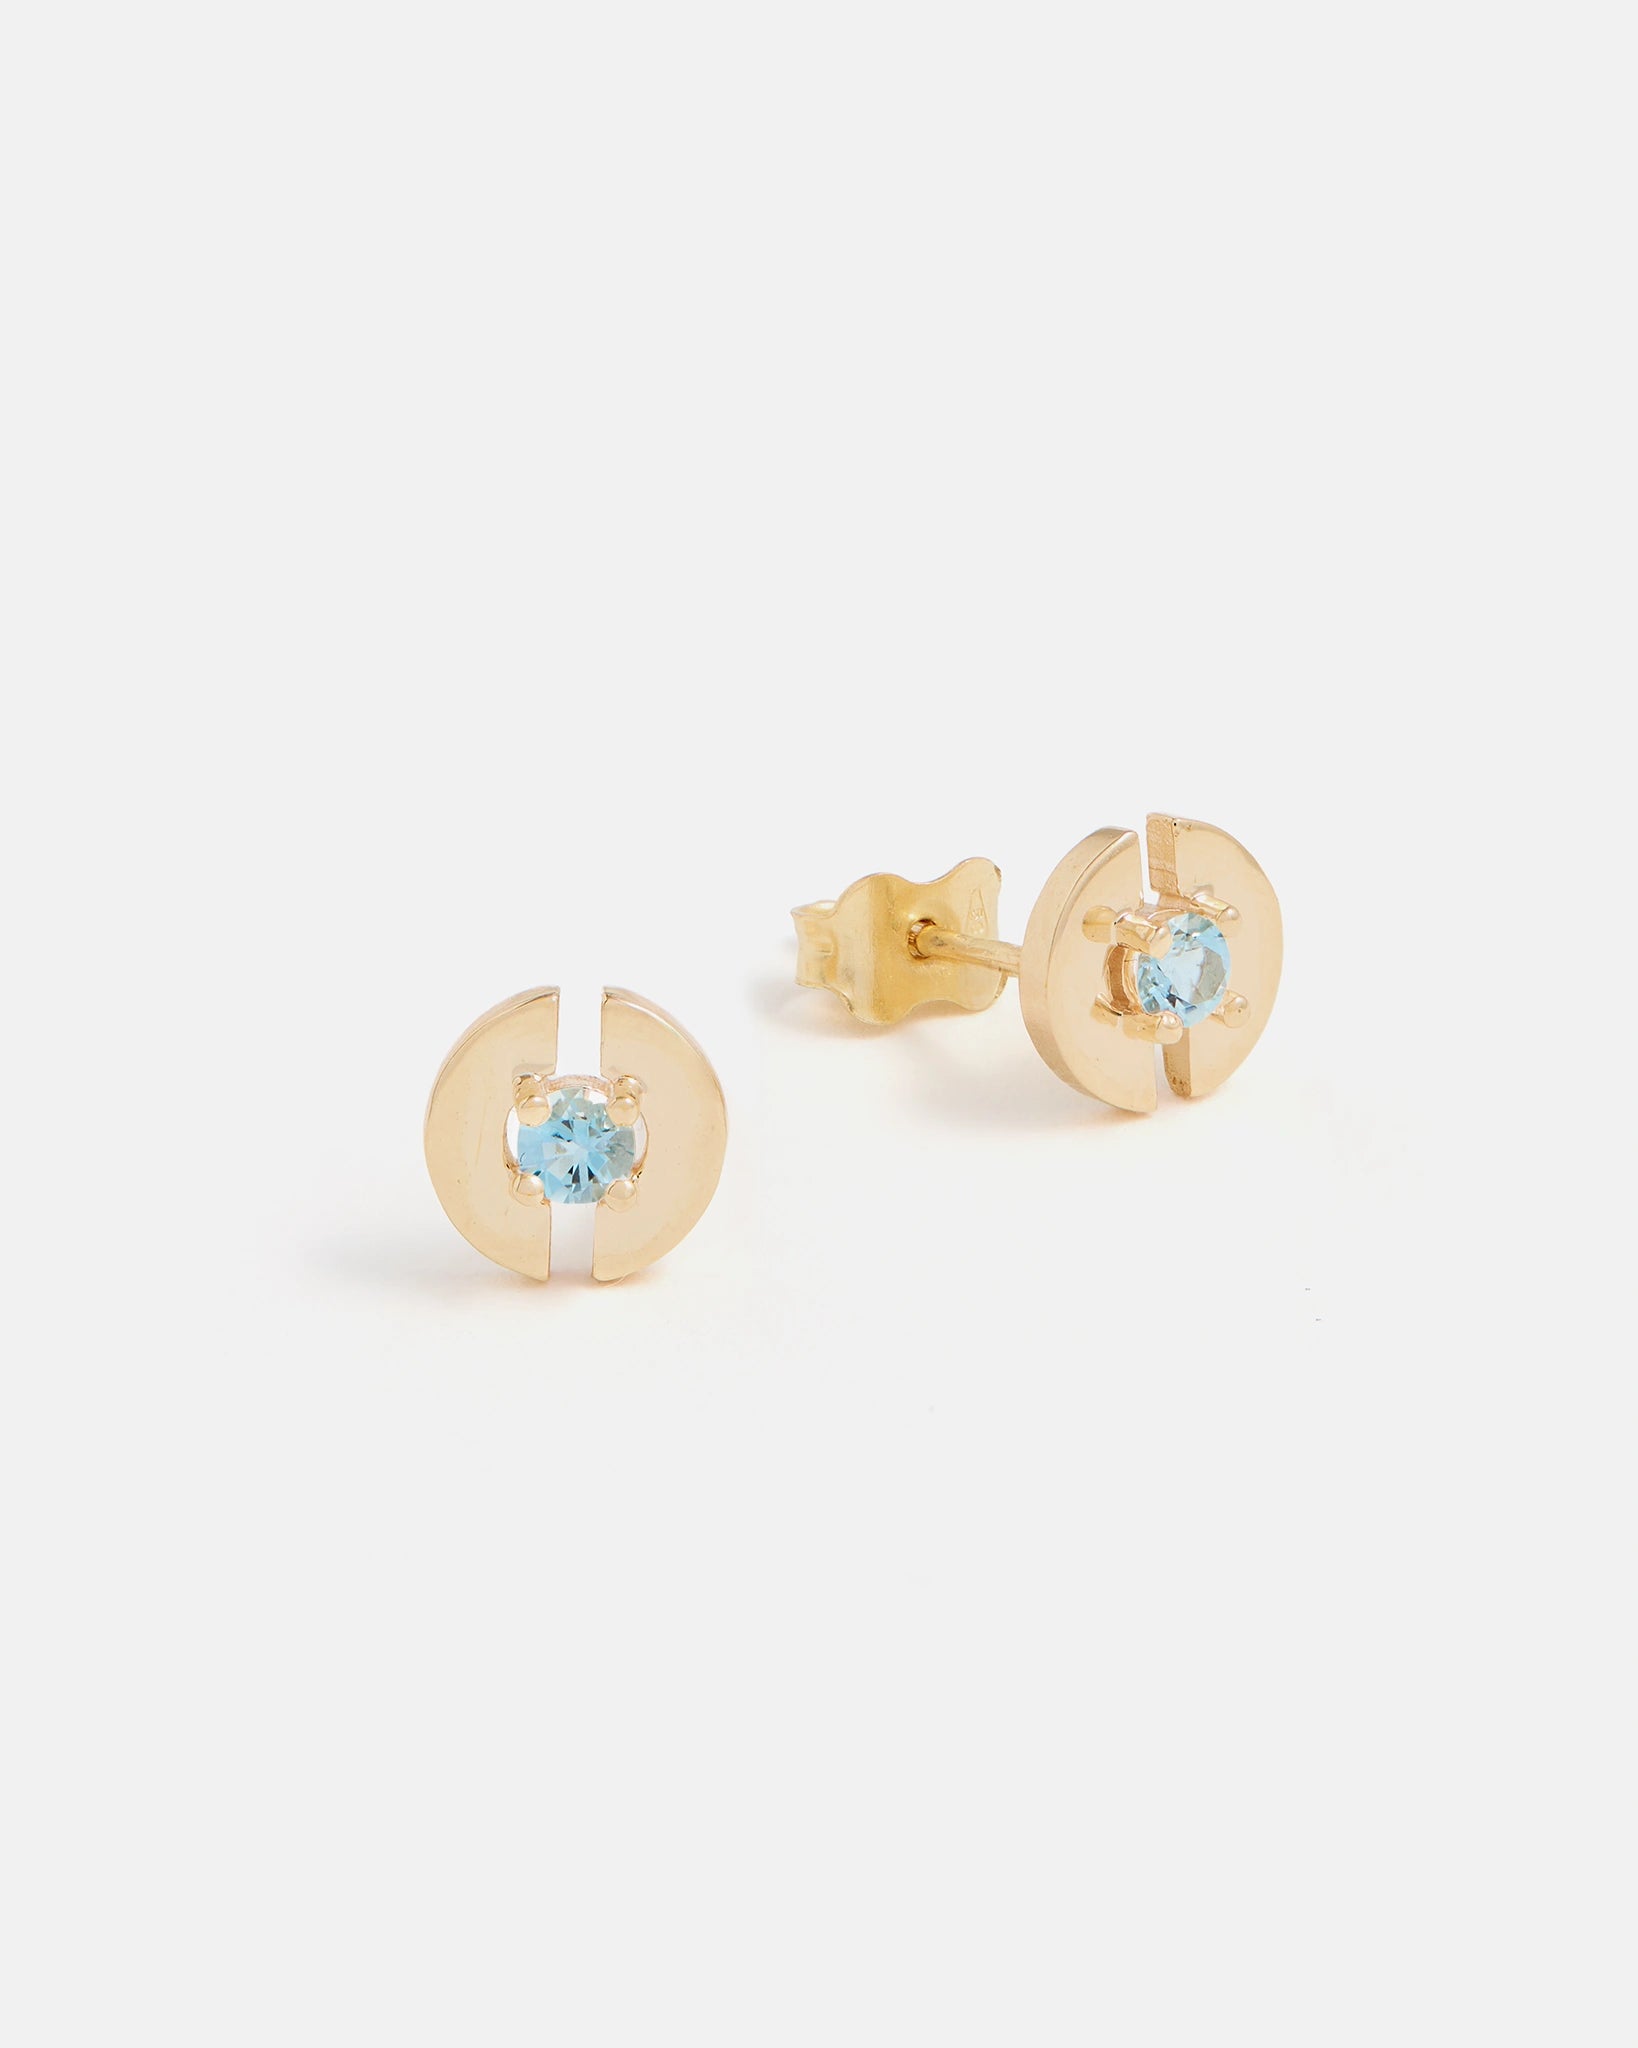 Stein Stud Earrings in 14K Yellow Gold with Aquamarine